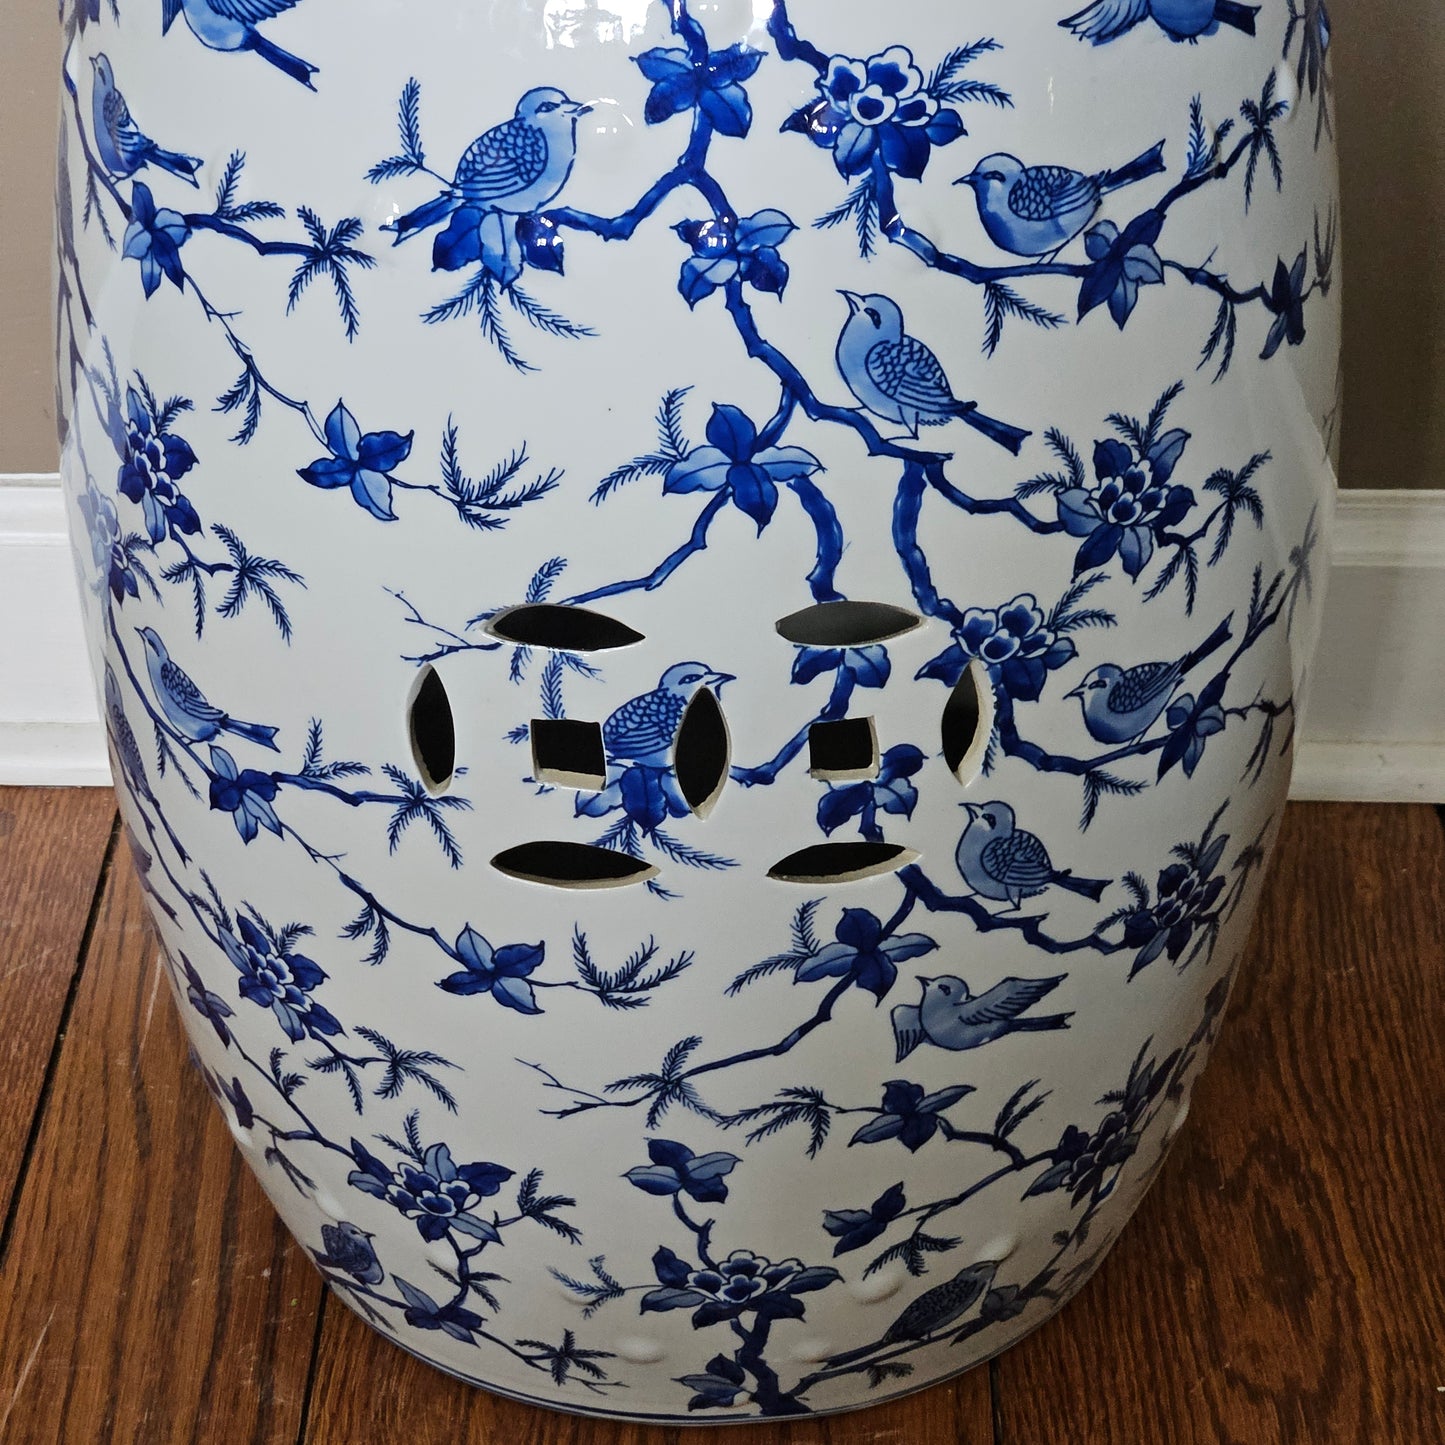 Asian Blue & White Porcelain Garden Stool with Floral Design ~ 2 Available